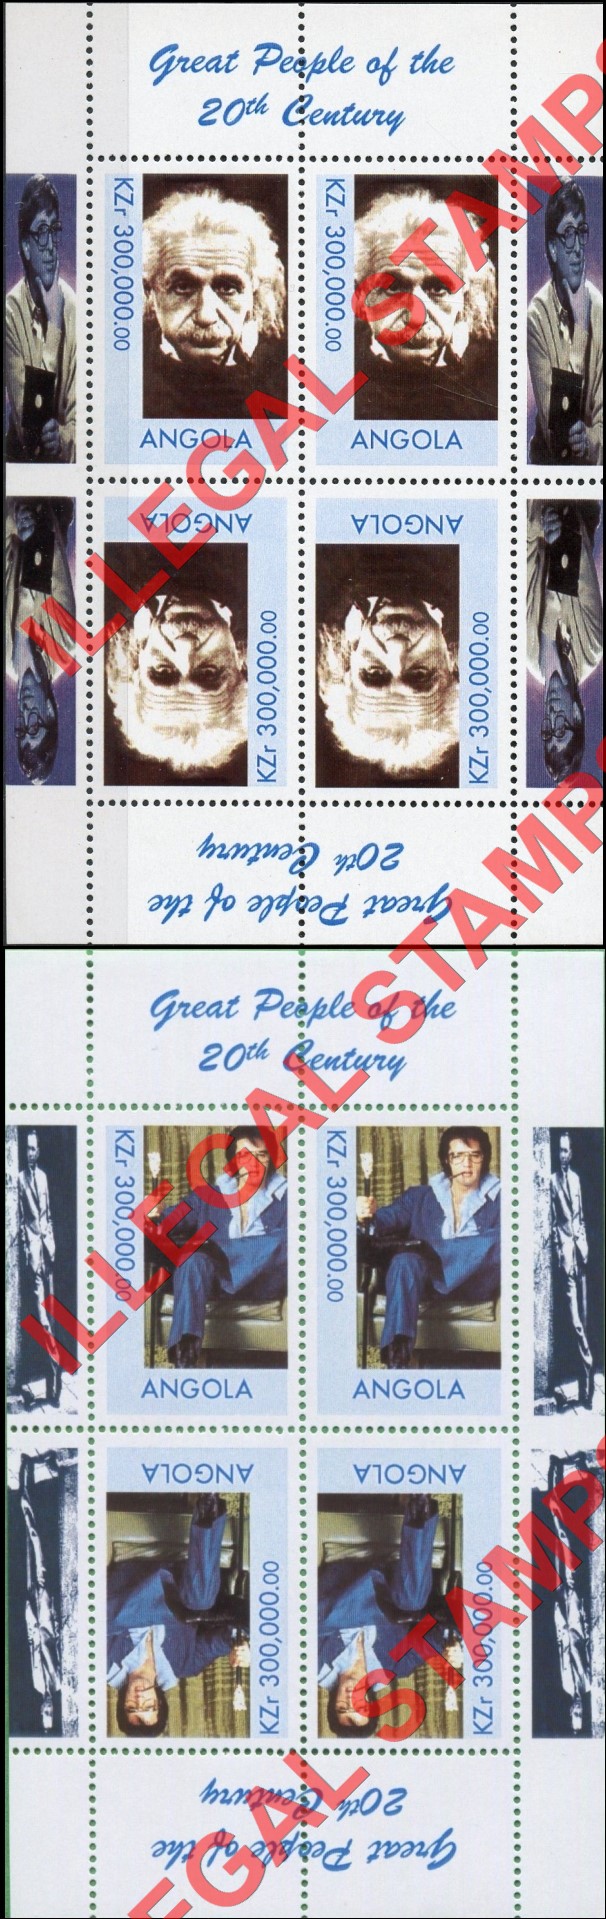 Angola 1999 Great People of the 20th Century Illegal Stamp Souvenir Sheets of 4